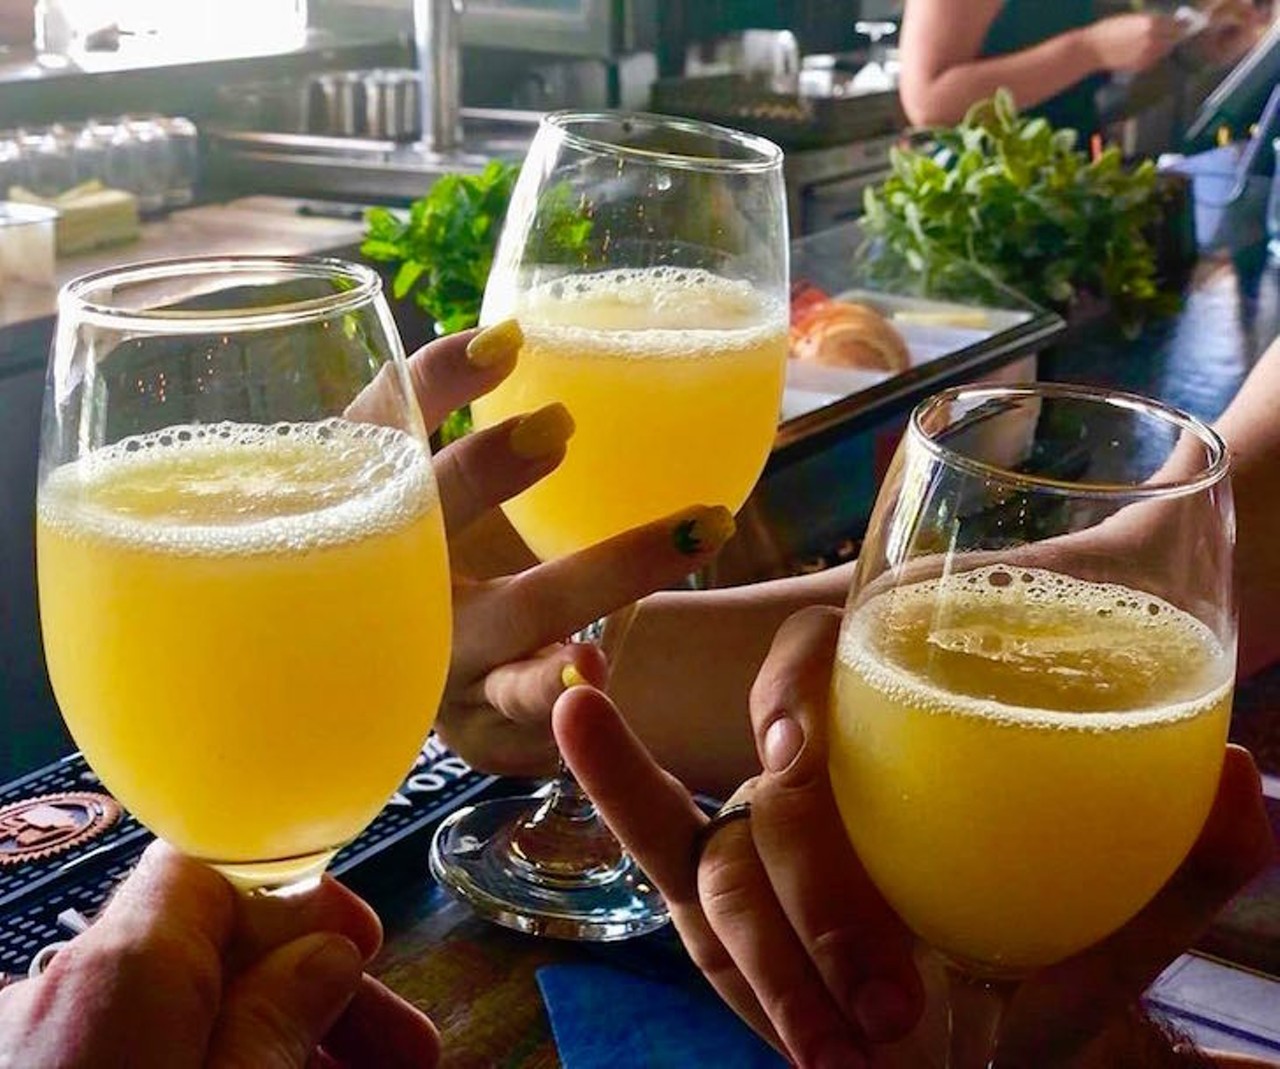 Cask Social Kitchen   
208 S. Howard Ave., Tampa, 813-251-0051
Top off your decadent weekend brunch at Cask Social Kitchen $20 bottomless mimosas or $20 bottomless aperol spritz any Saturday or Sunday between 11 a.m. and 4 p.m. You may want to drink fast to get the bang for your buck because these bottomless deals have an hour and a half shelf life.
Photo via Cask Social/Facebook